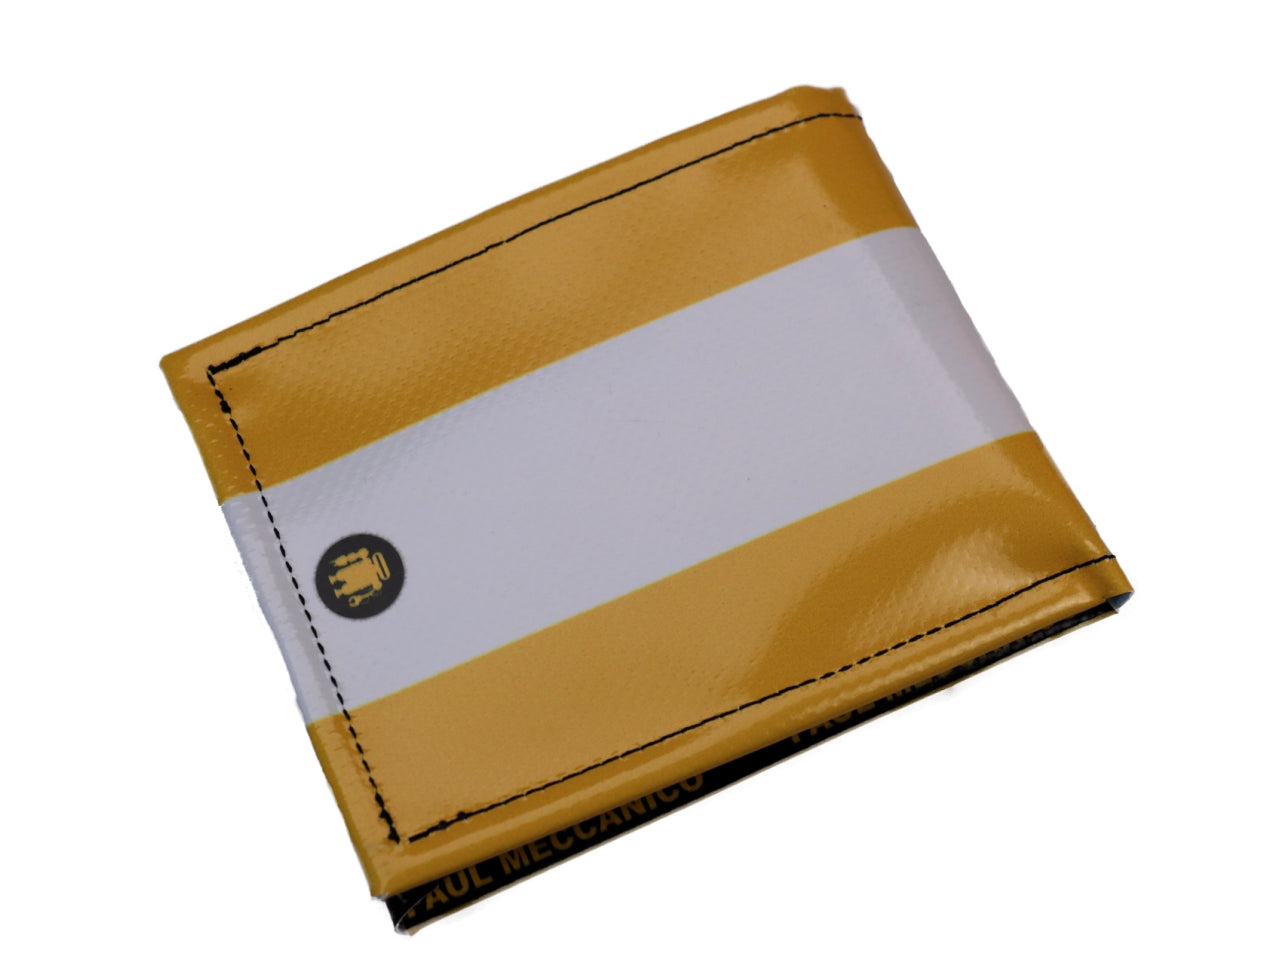 MEN'S WALLET YELLOW AND WHITE. MODEL CRIK MADE OF LORRY TARPAULIN. - Limited Edition Paul Meccanico